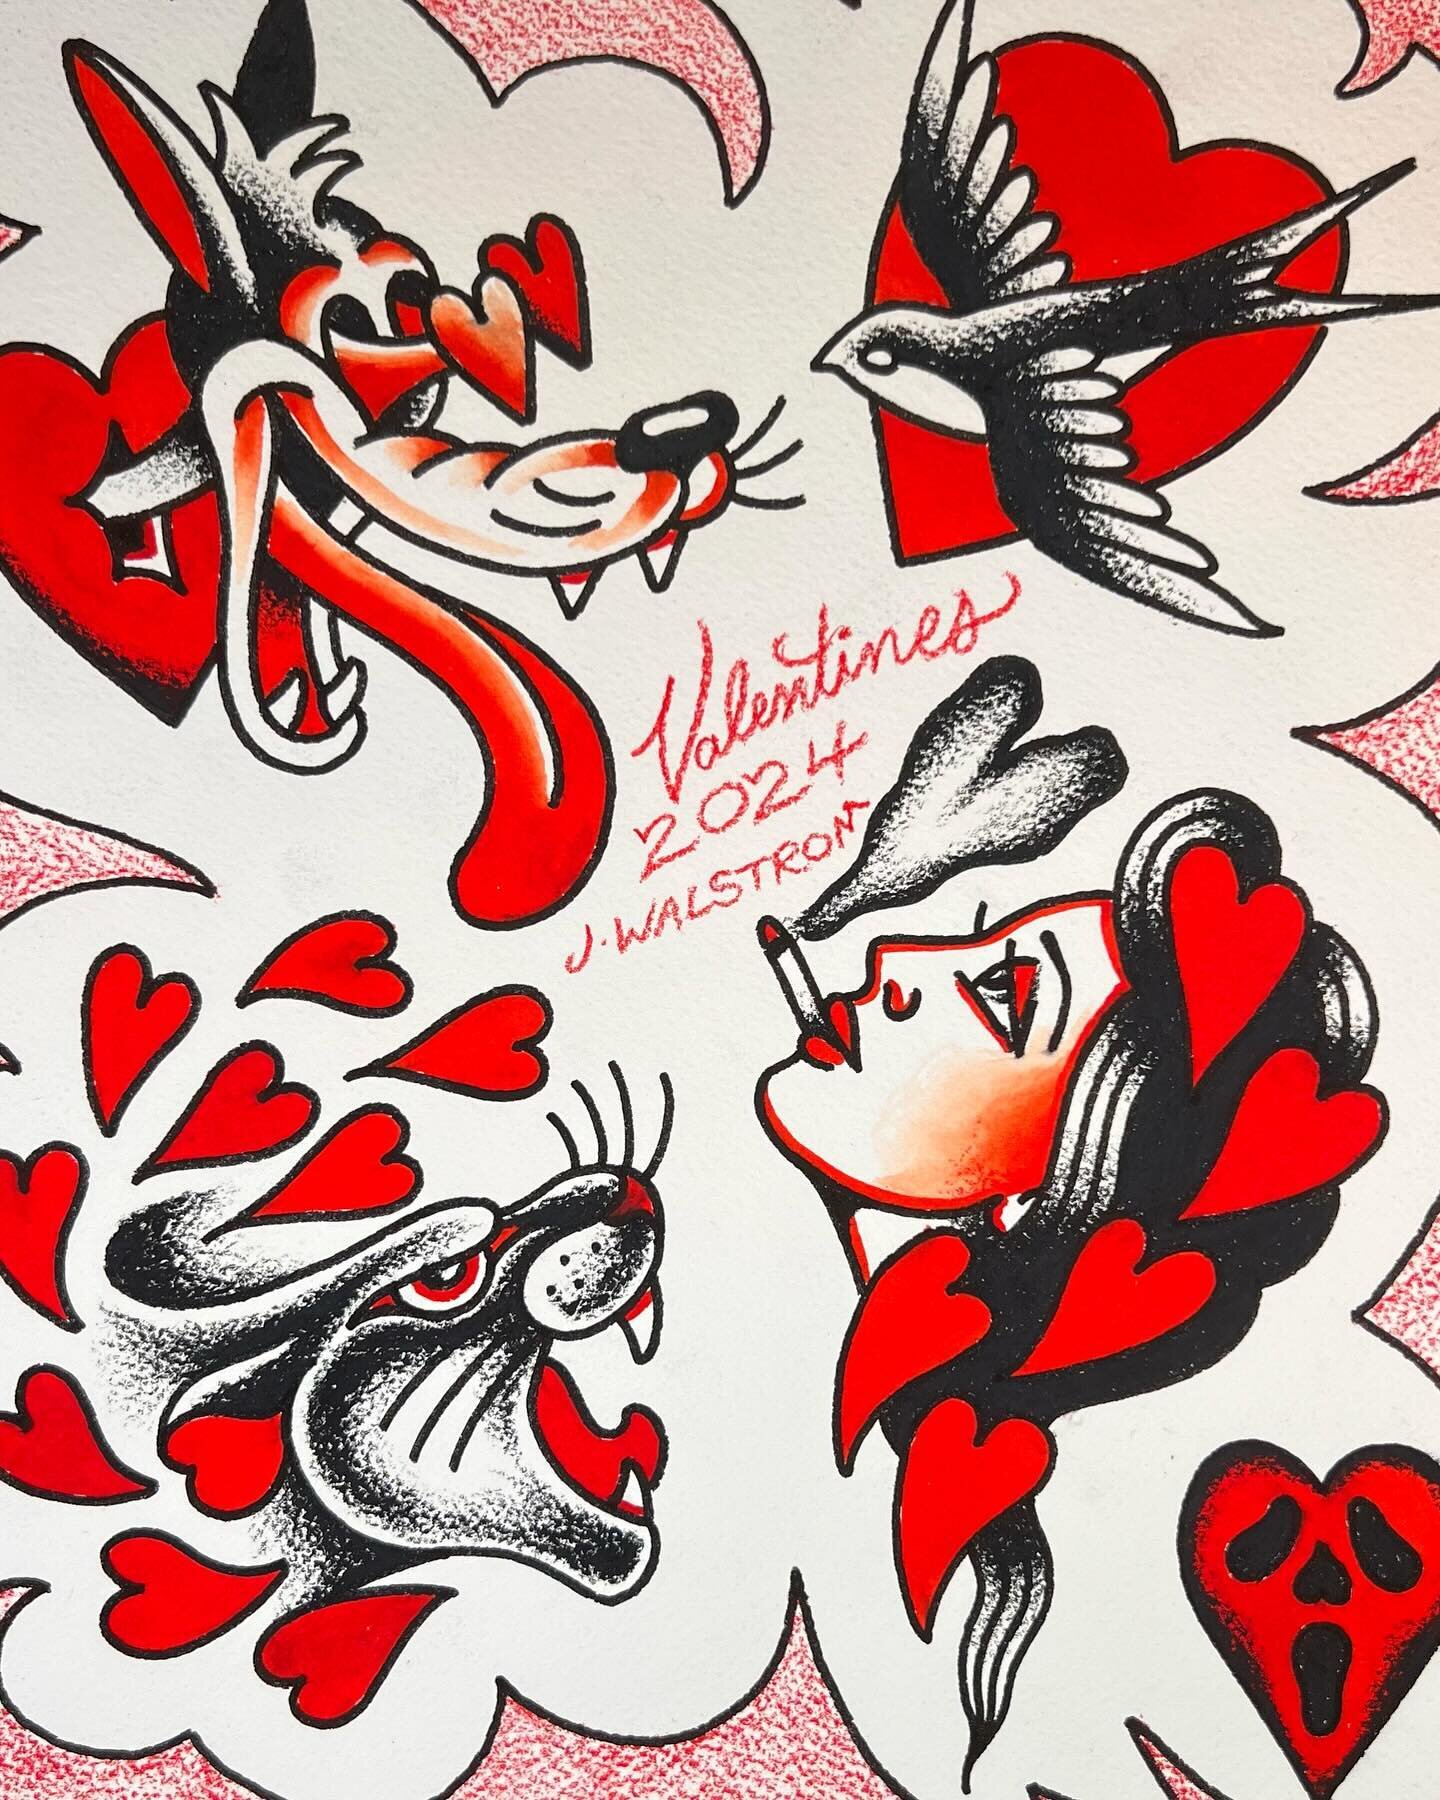 full design offerings!! 
❣️ @jasonwalstrom ❣️ @dusty.tat2 ❣️ @carbellatattoo ❣️@d.a.kvam ❣️ @jgunnzo ❣️ @jewelsidette ❣️

Wednesday February 14th, 12pm-7pm! Flash prices will range from $100 - $200! 

Around noon I will be going out to the line to ge